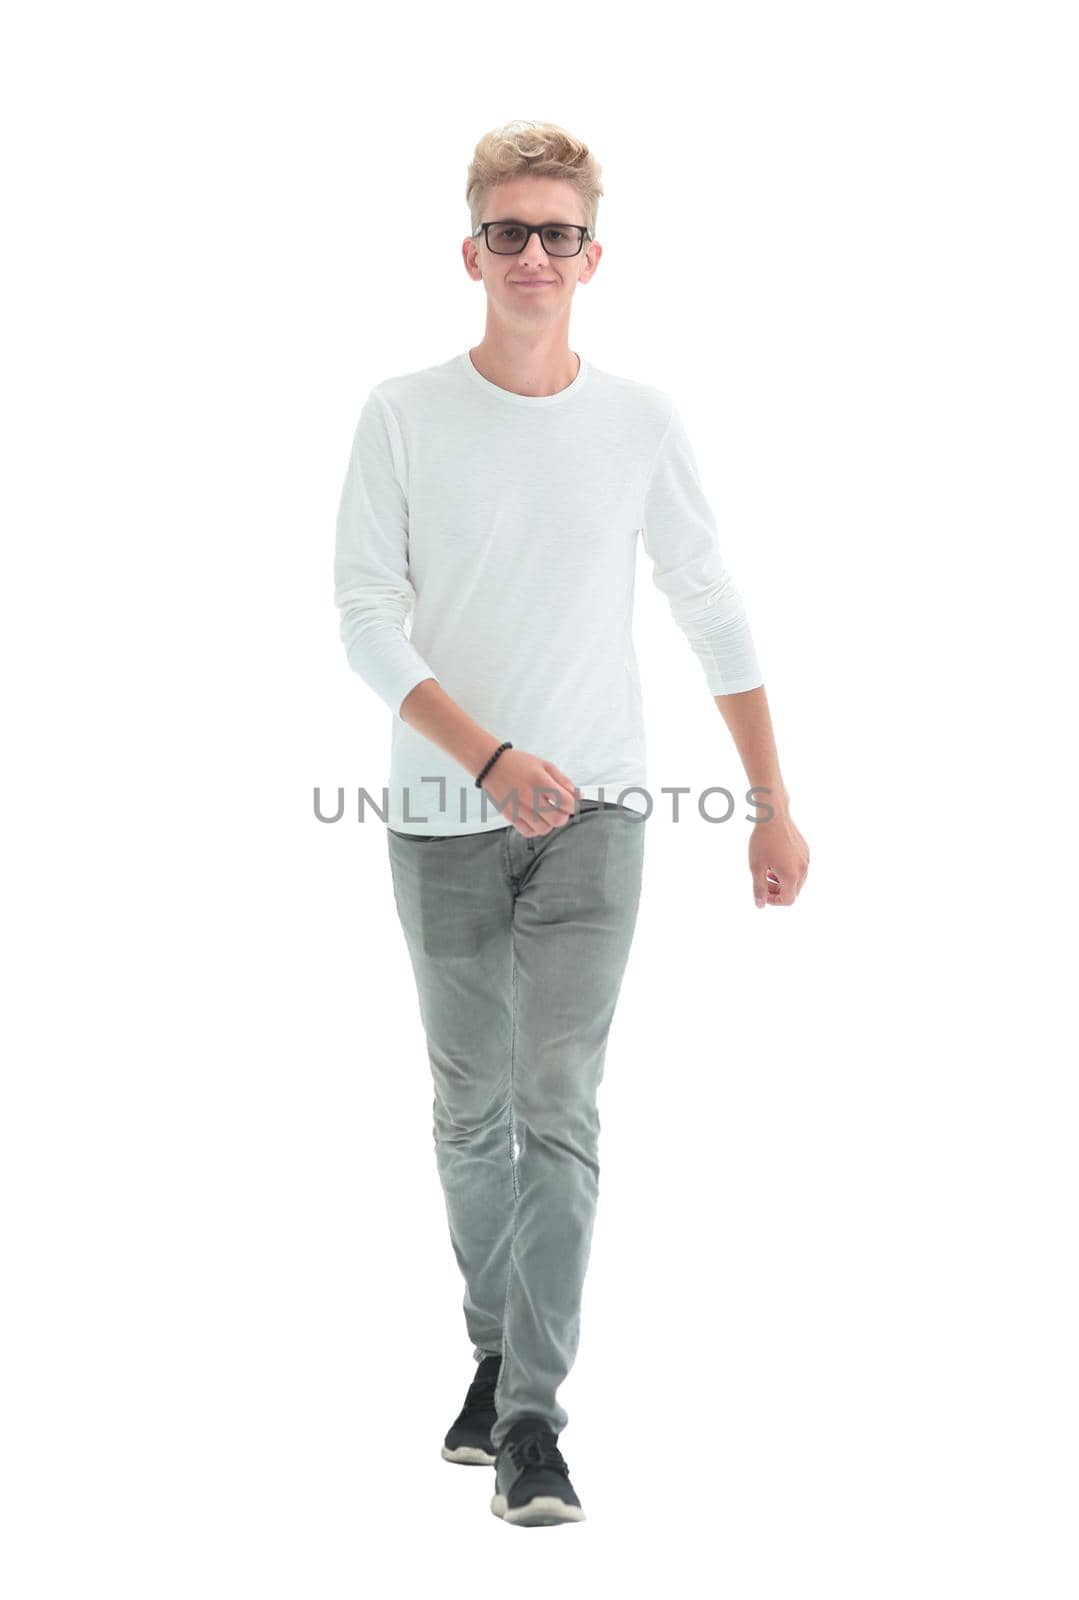 in full growth. confident young man striding forward. isolated on white